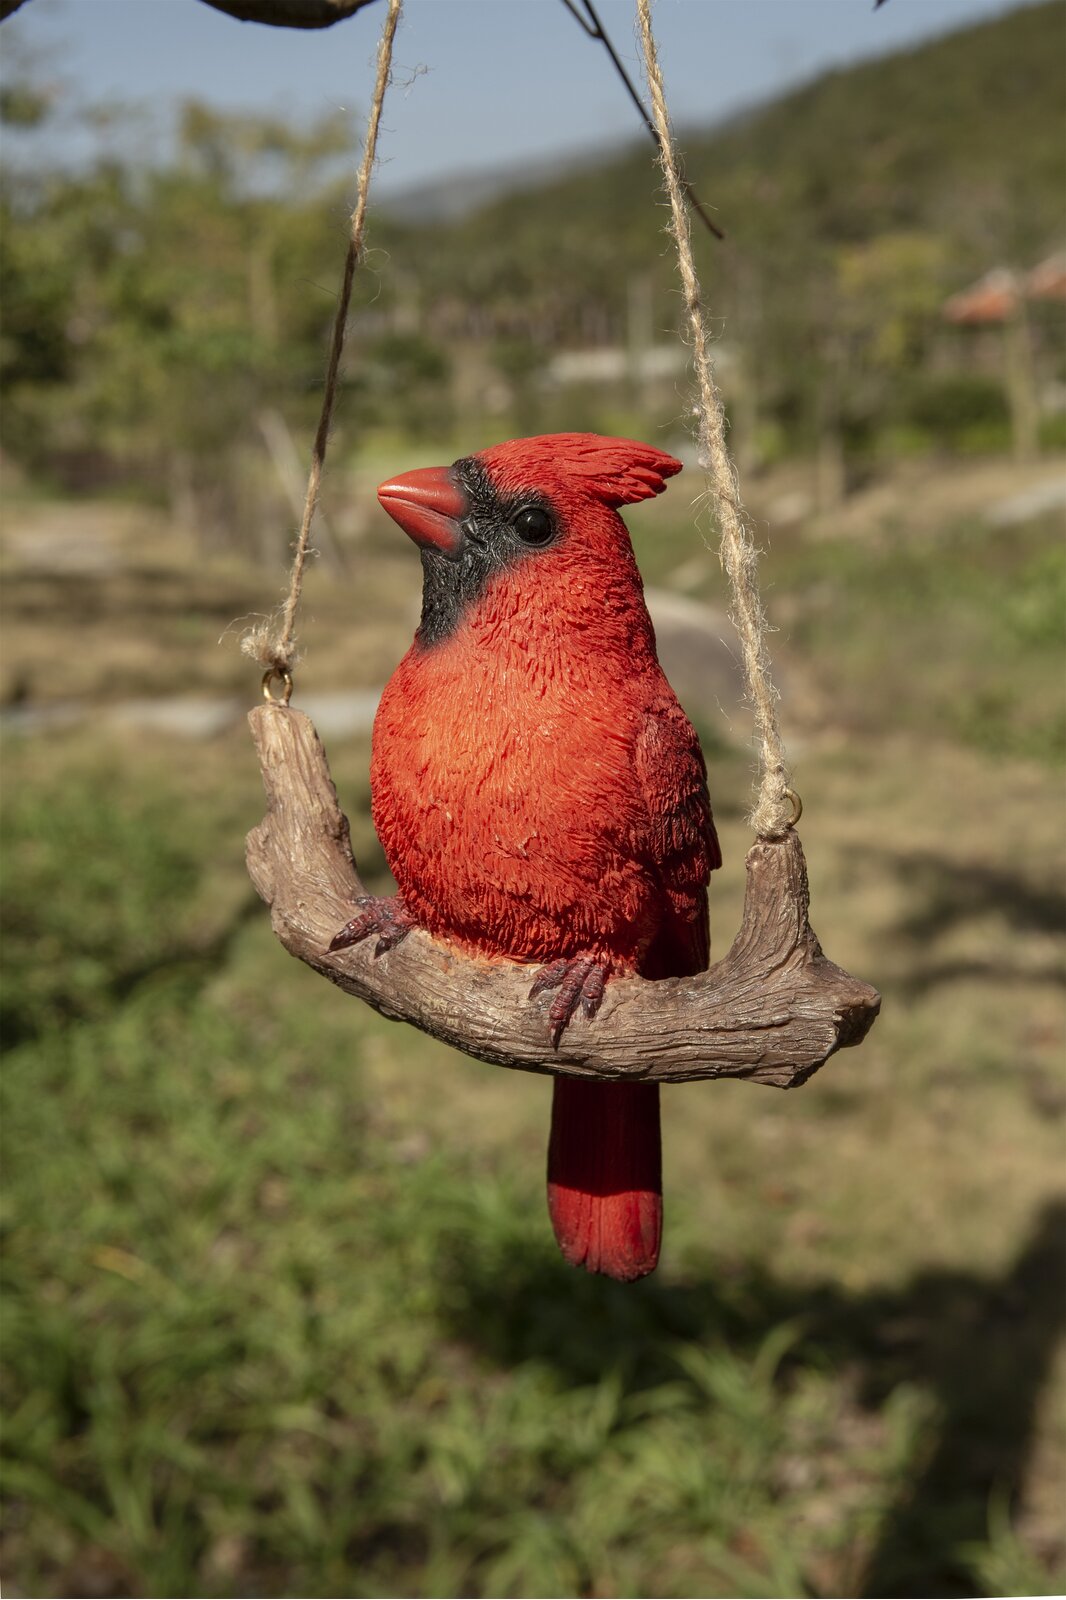 Red Hanging Cardinal on a Branch AS132